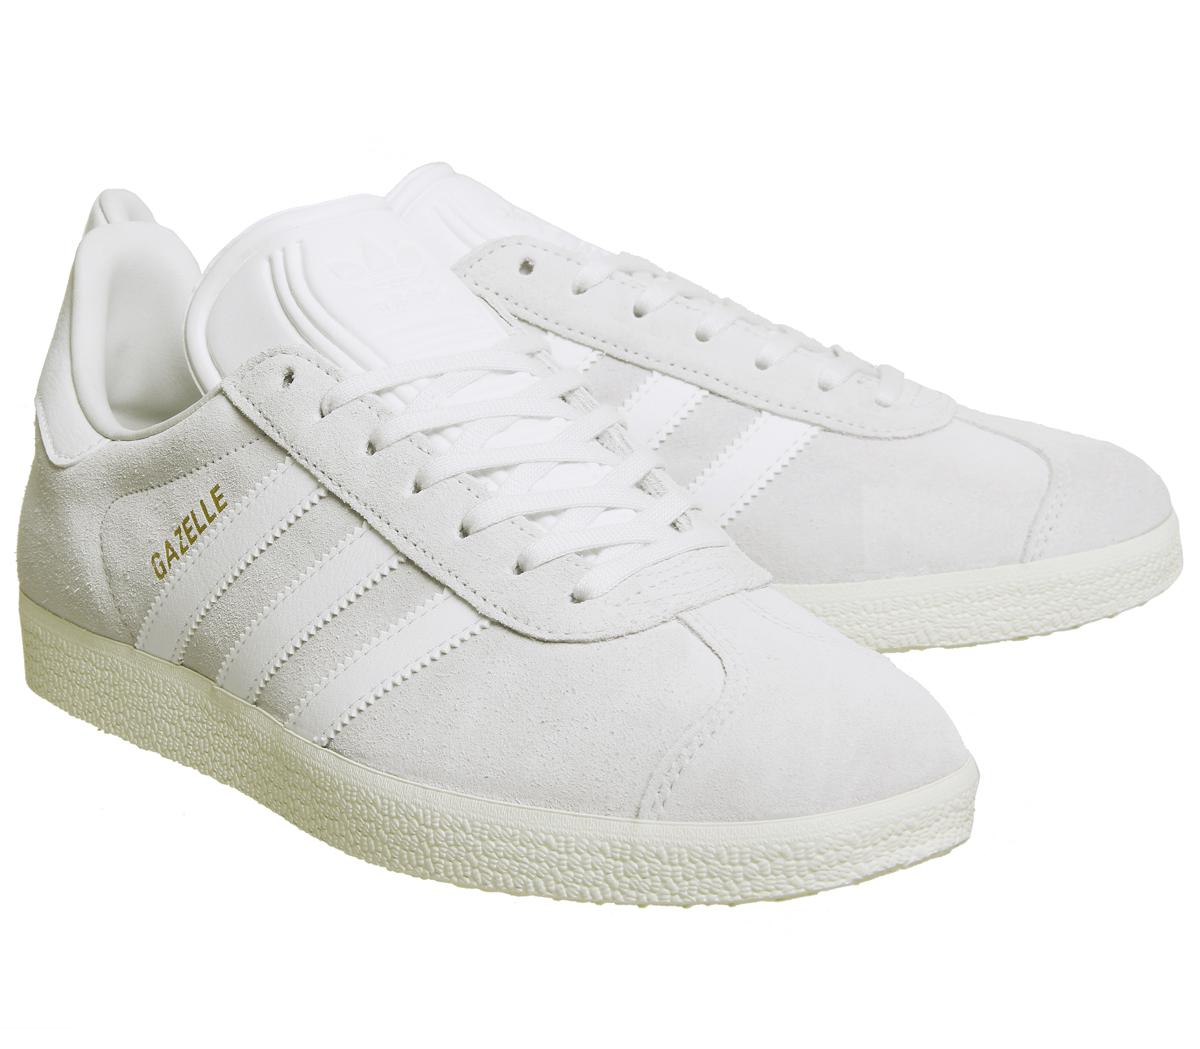 Lyst - Adidas Gazelle Trainers in White